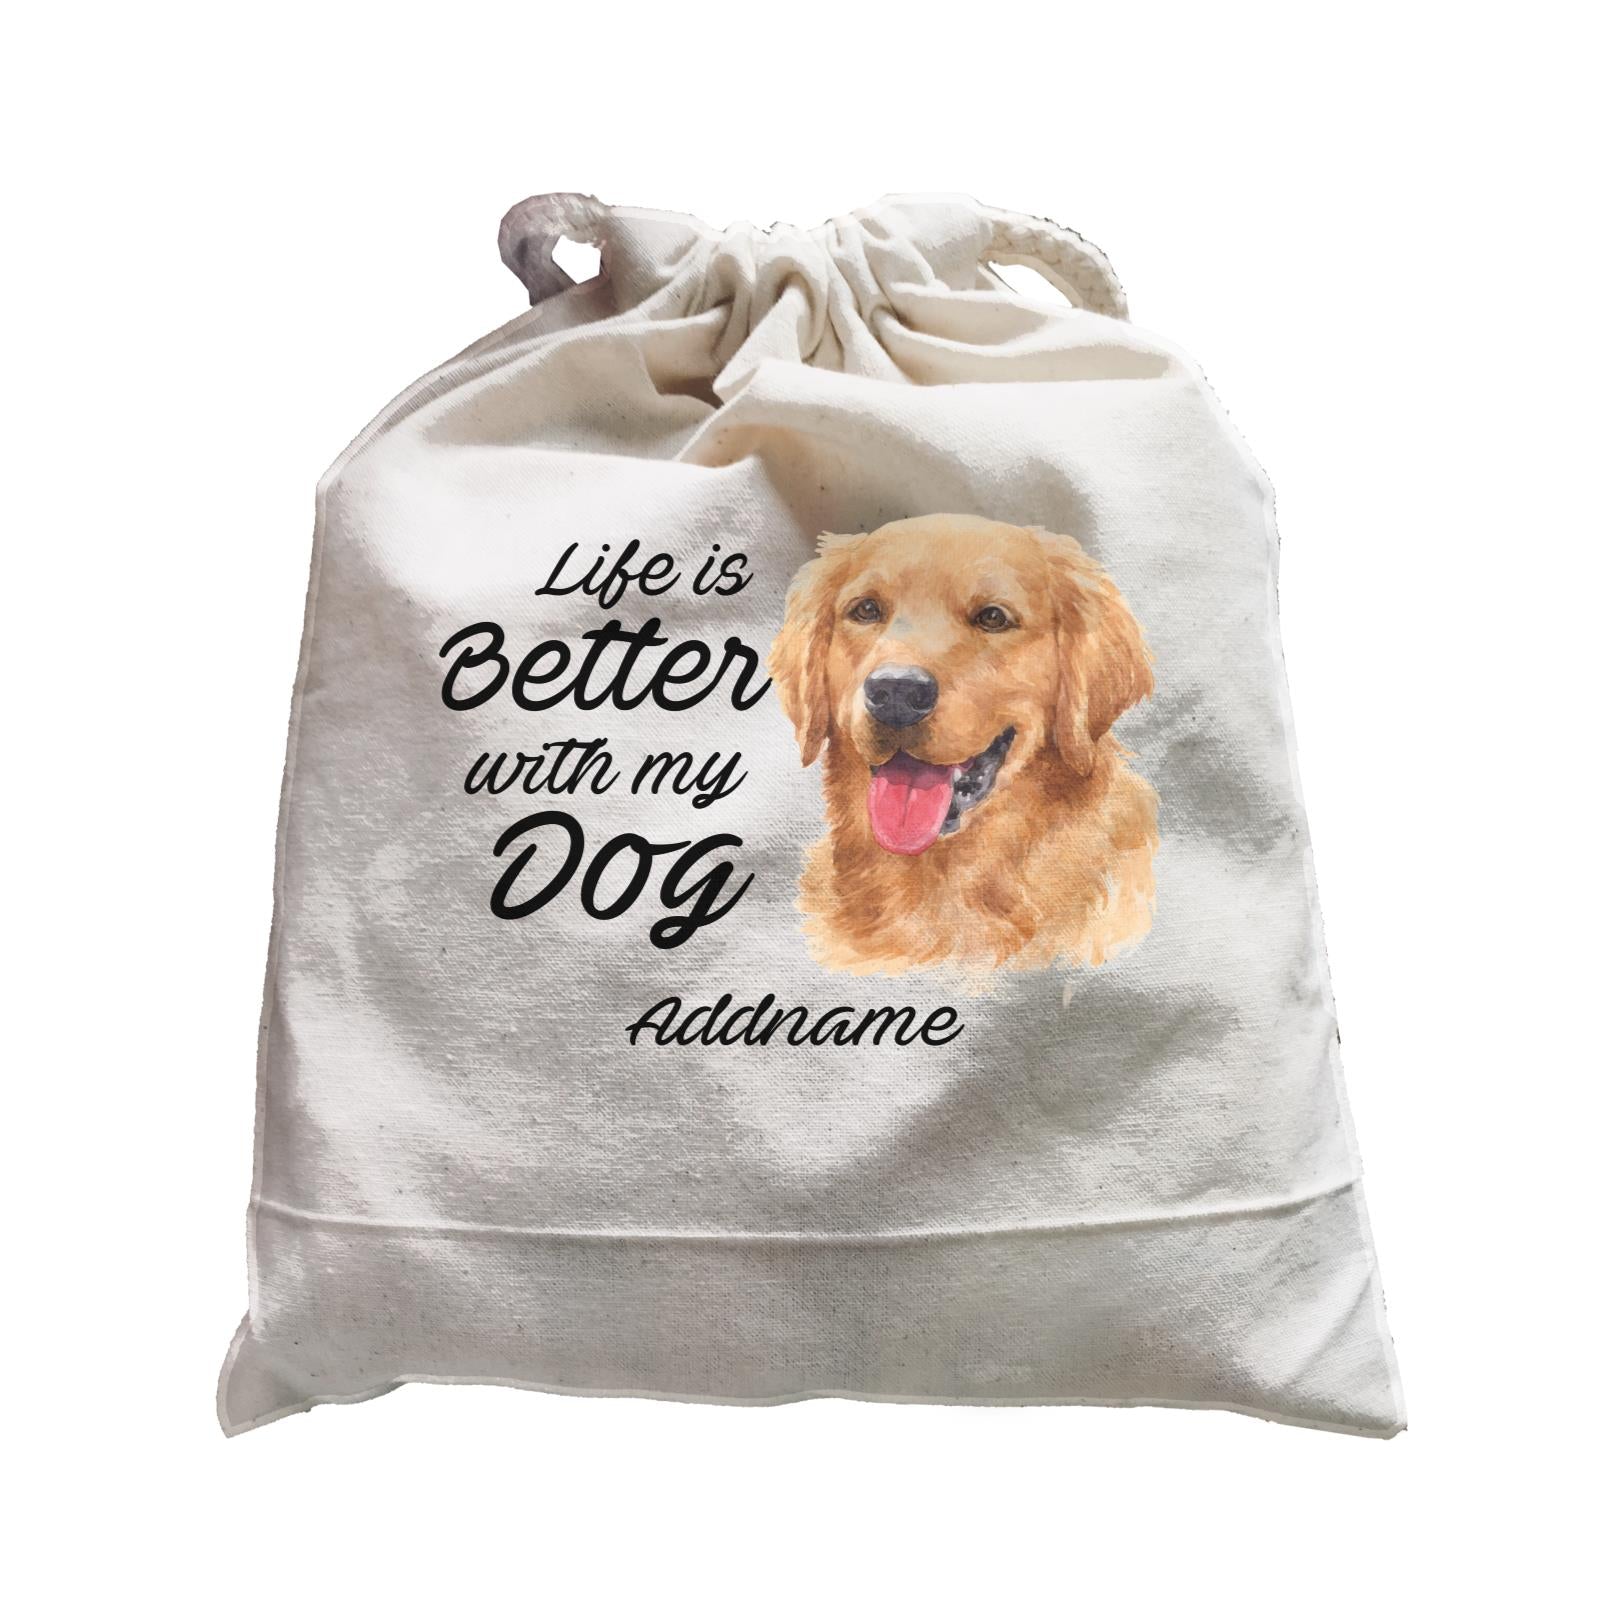 Watercolor Life is Better With My Dog Golden Retriever Addname Satchel